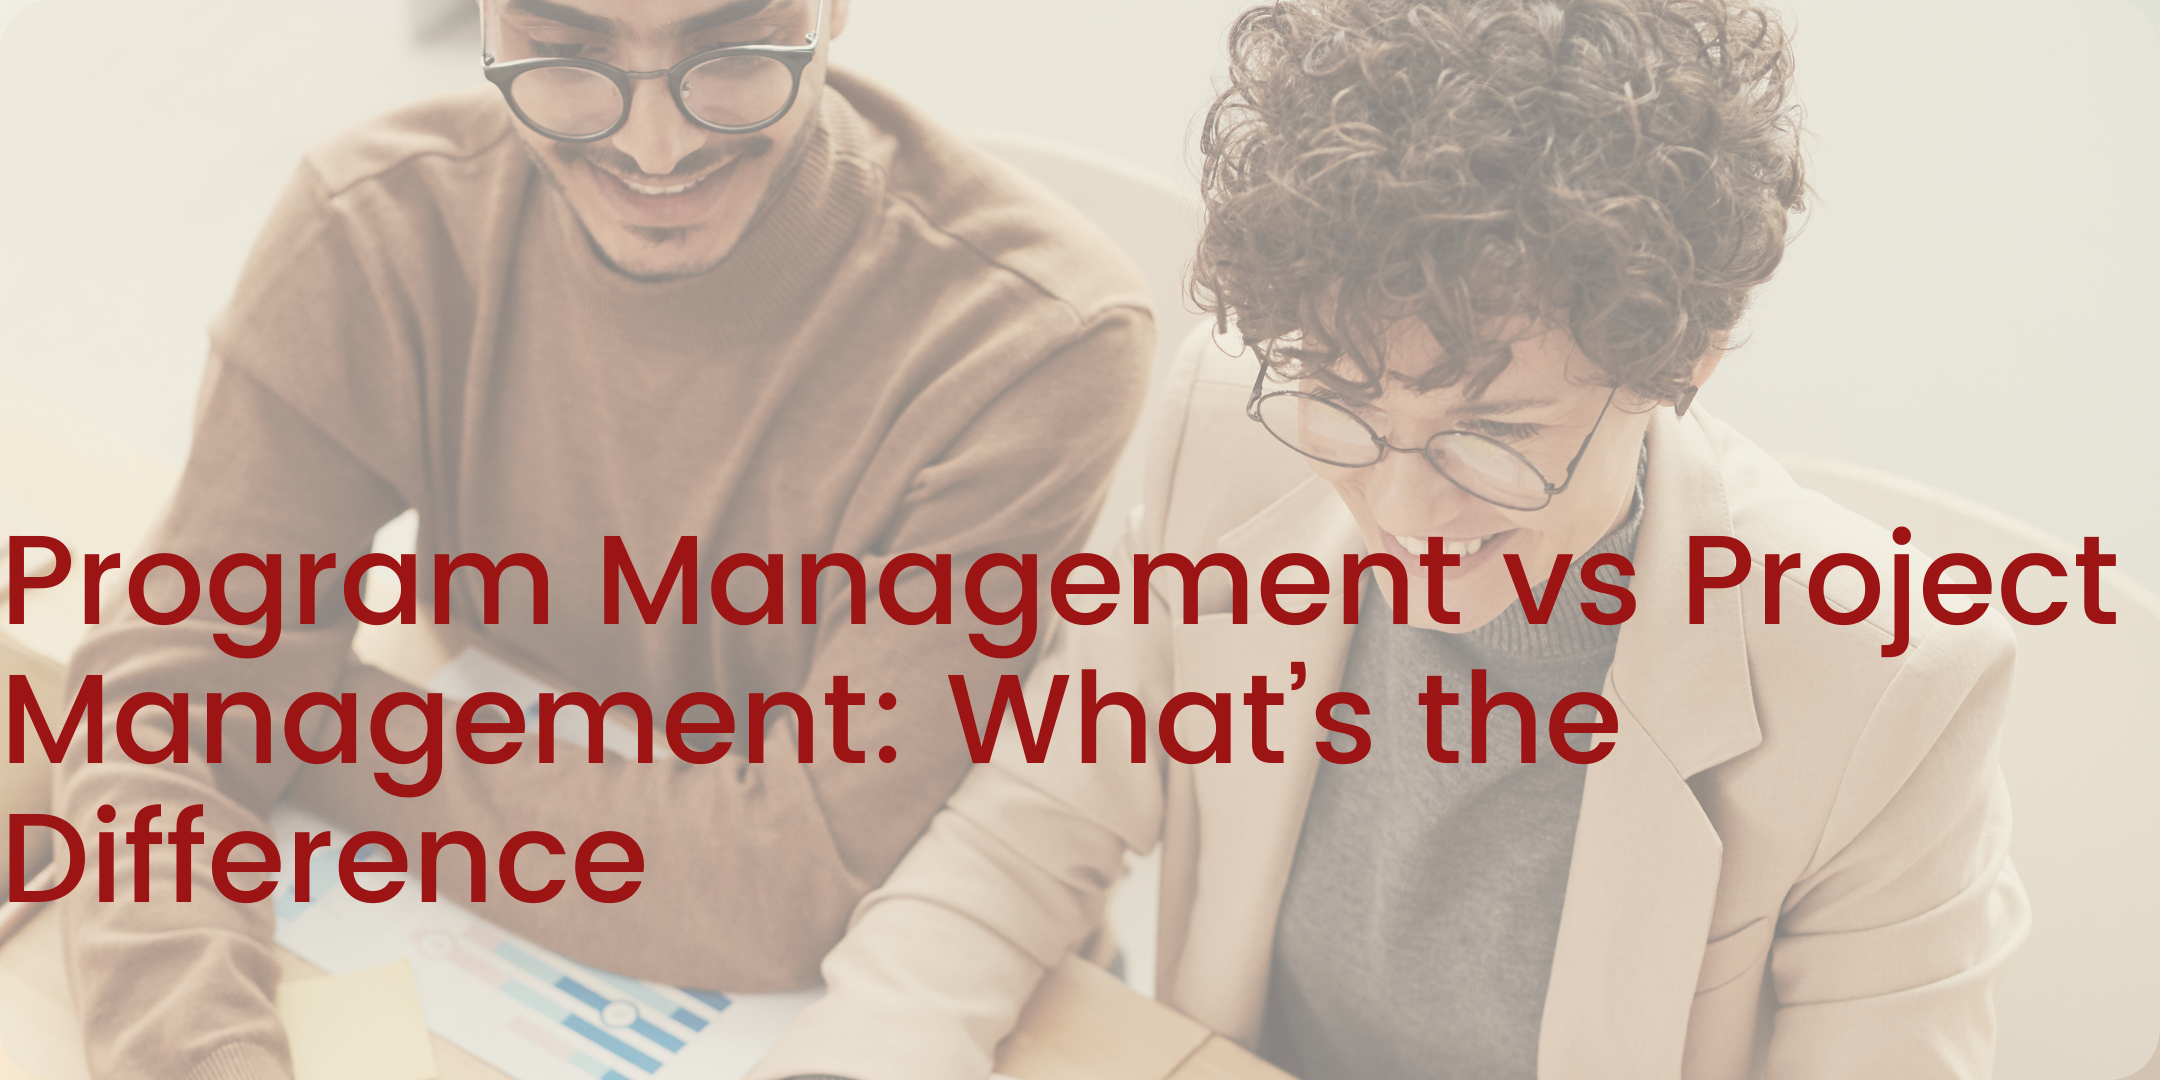 Program Management vs Project Management: What's the Difference